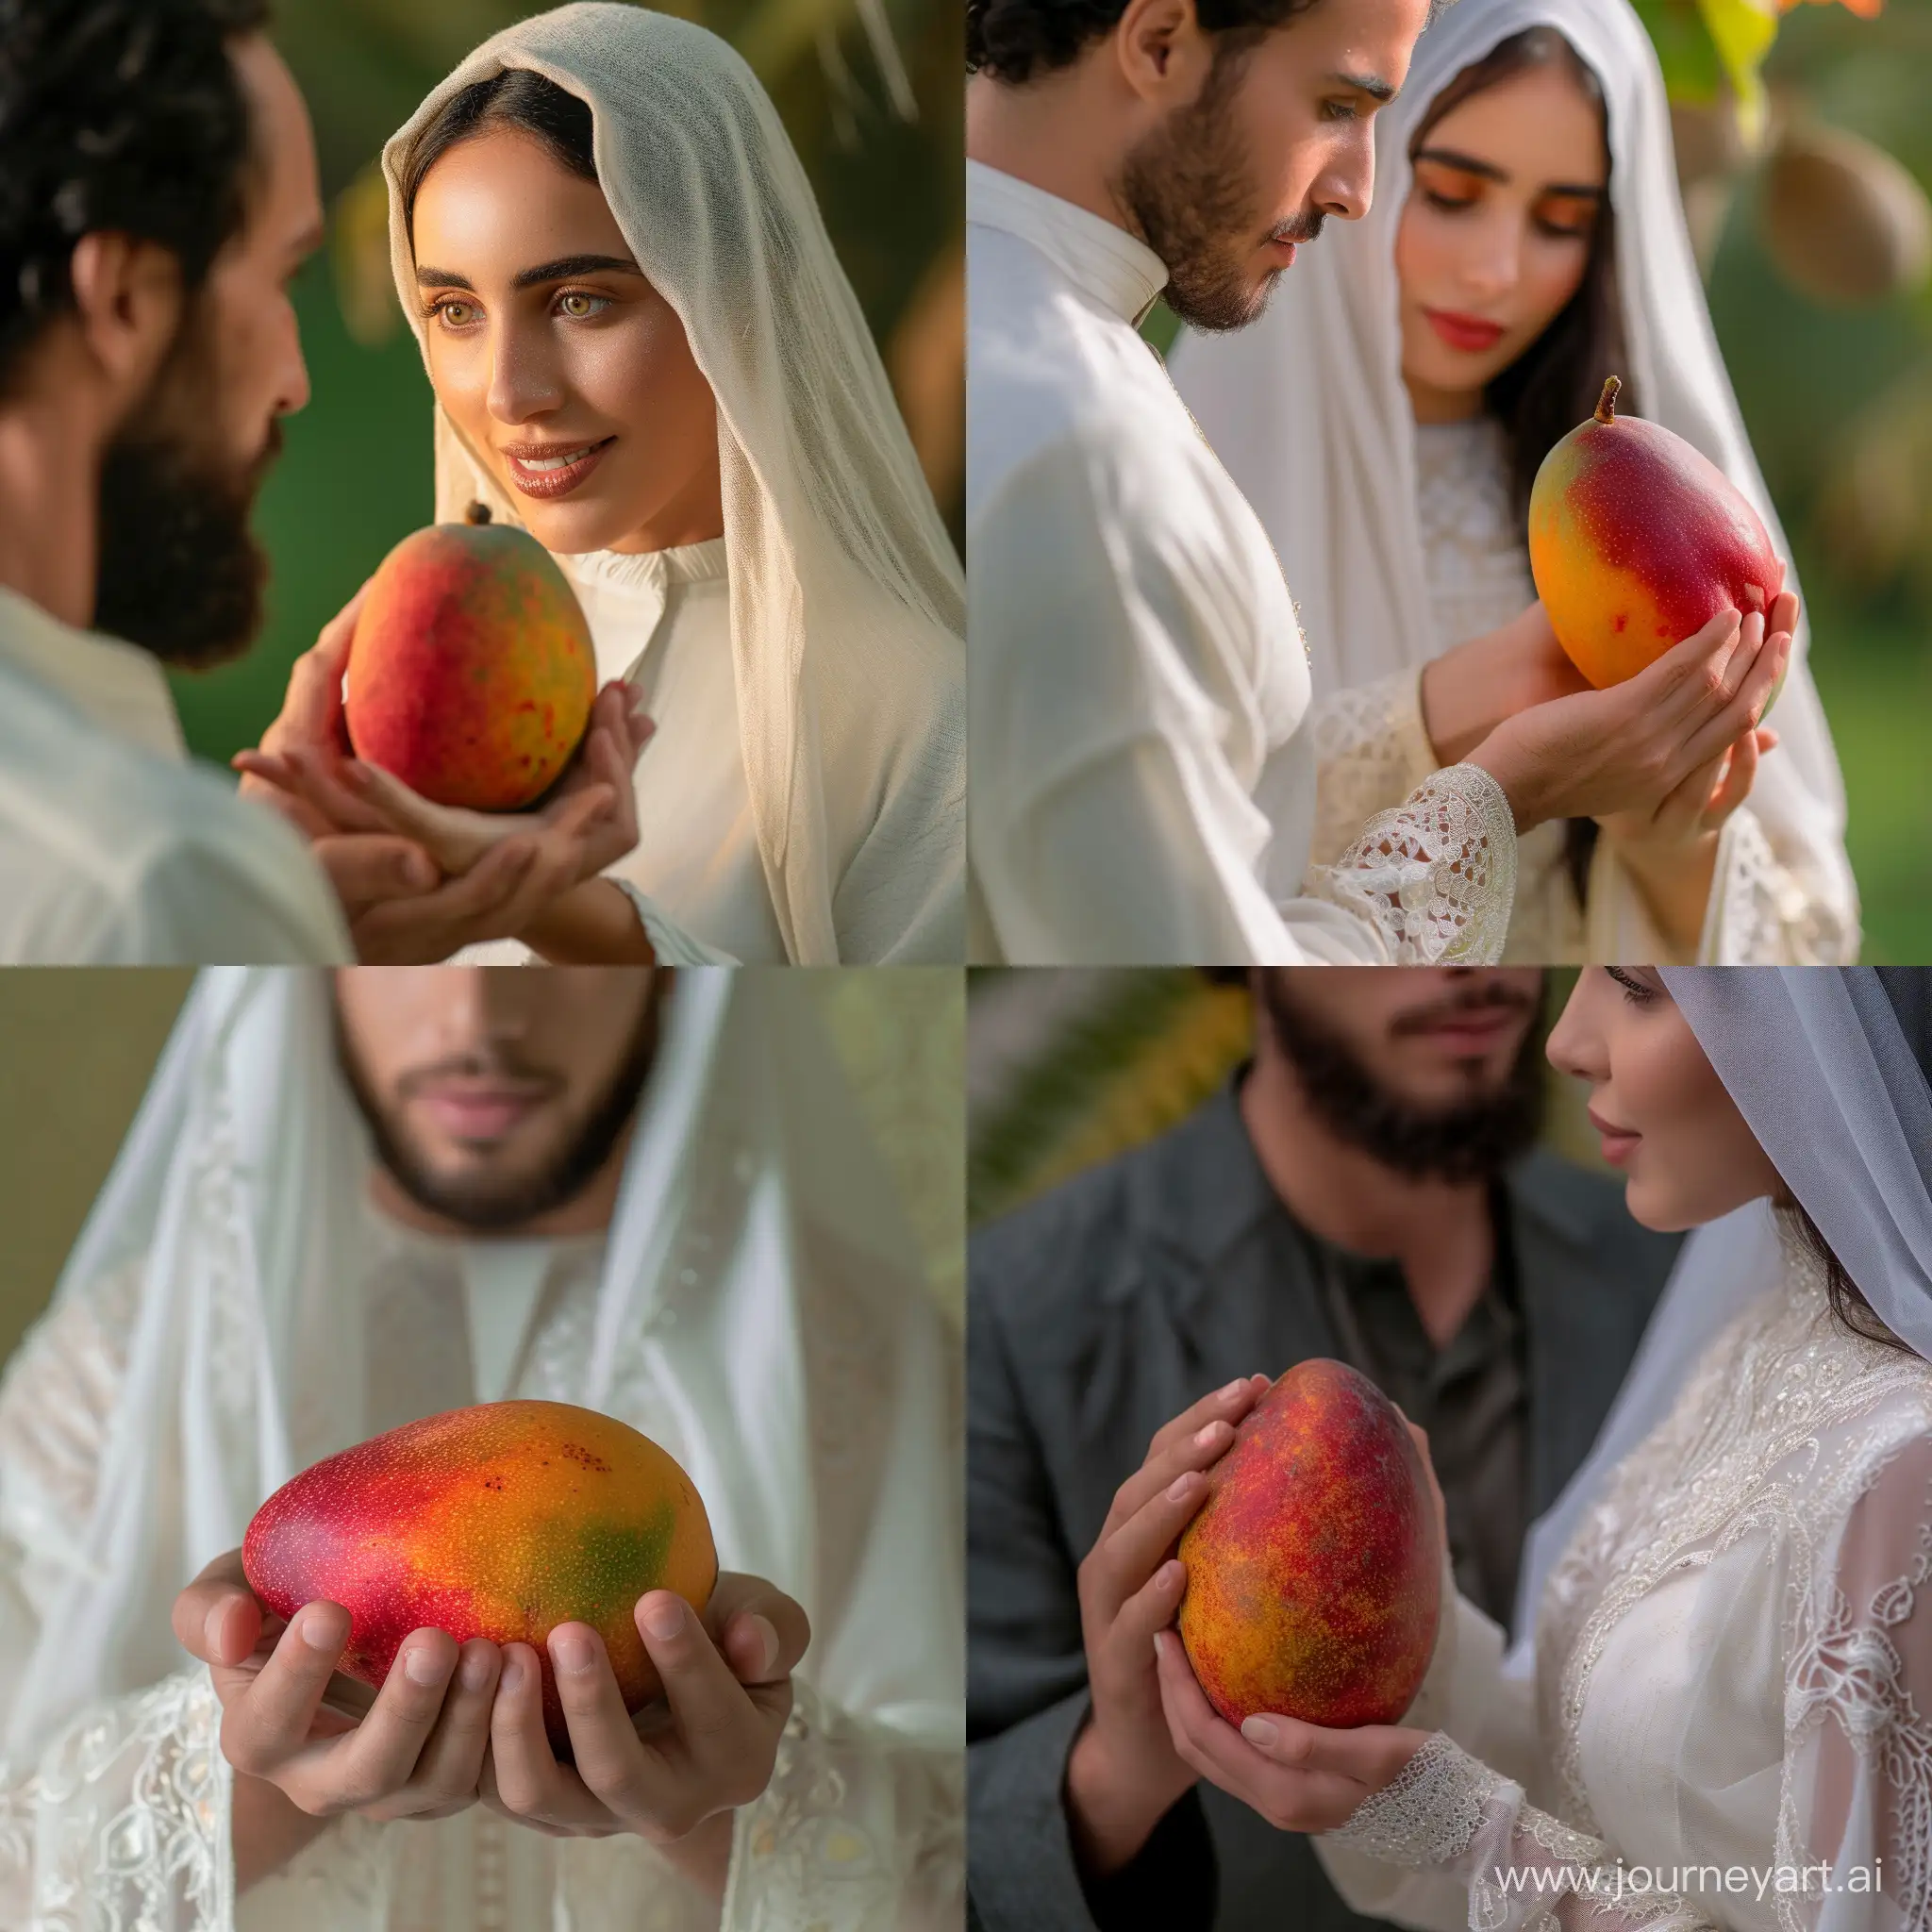 A real photo of a young and beautiful woman in a white Arabic dress holding a red and orange mango in her hands. Focus on the mango and the man's face. The mango should be in the middle of the picture.